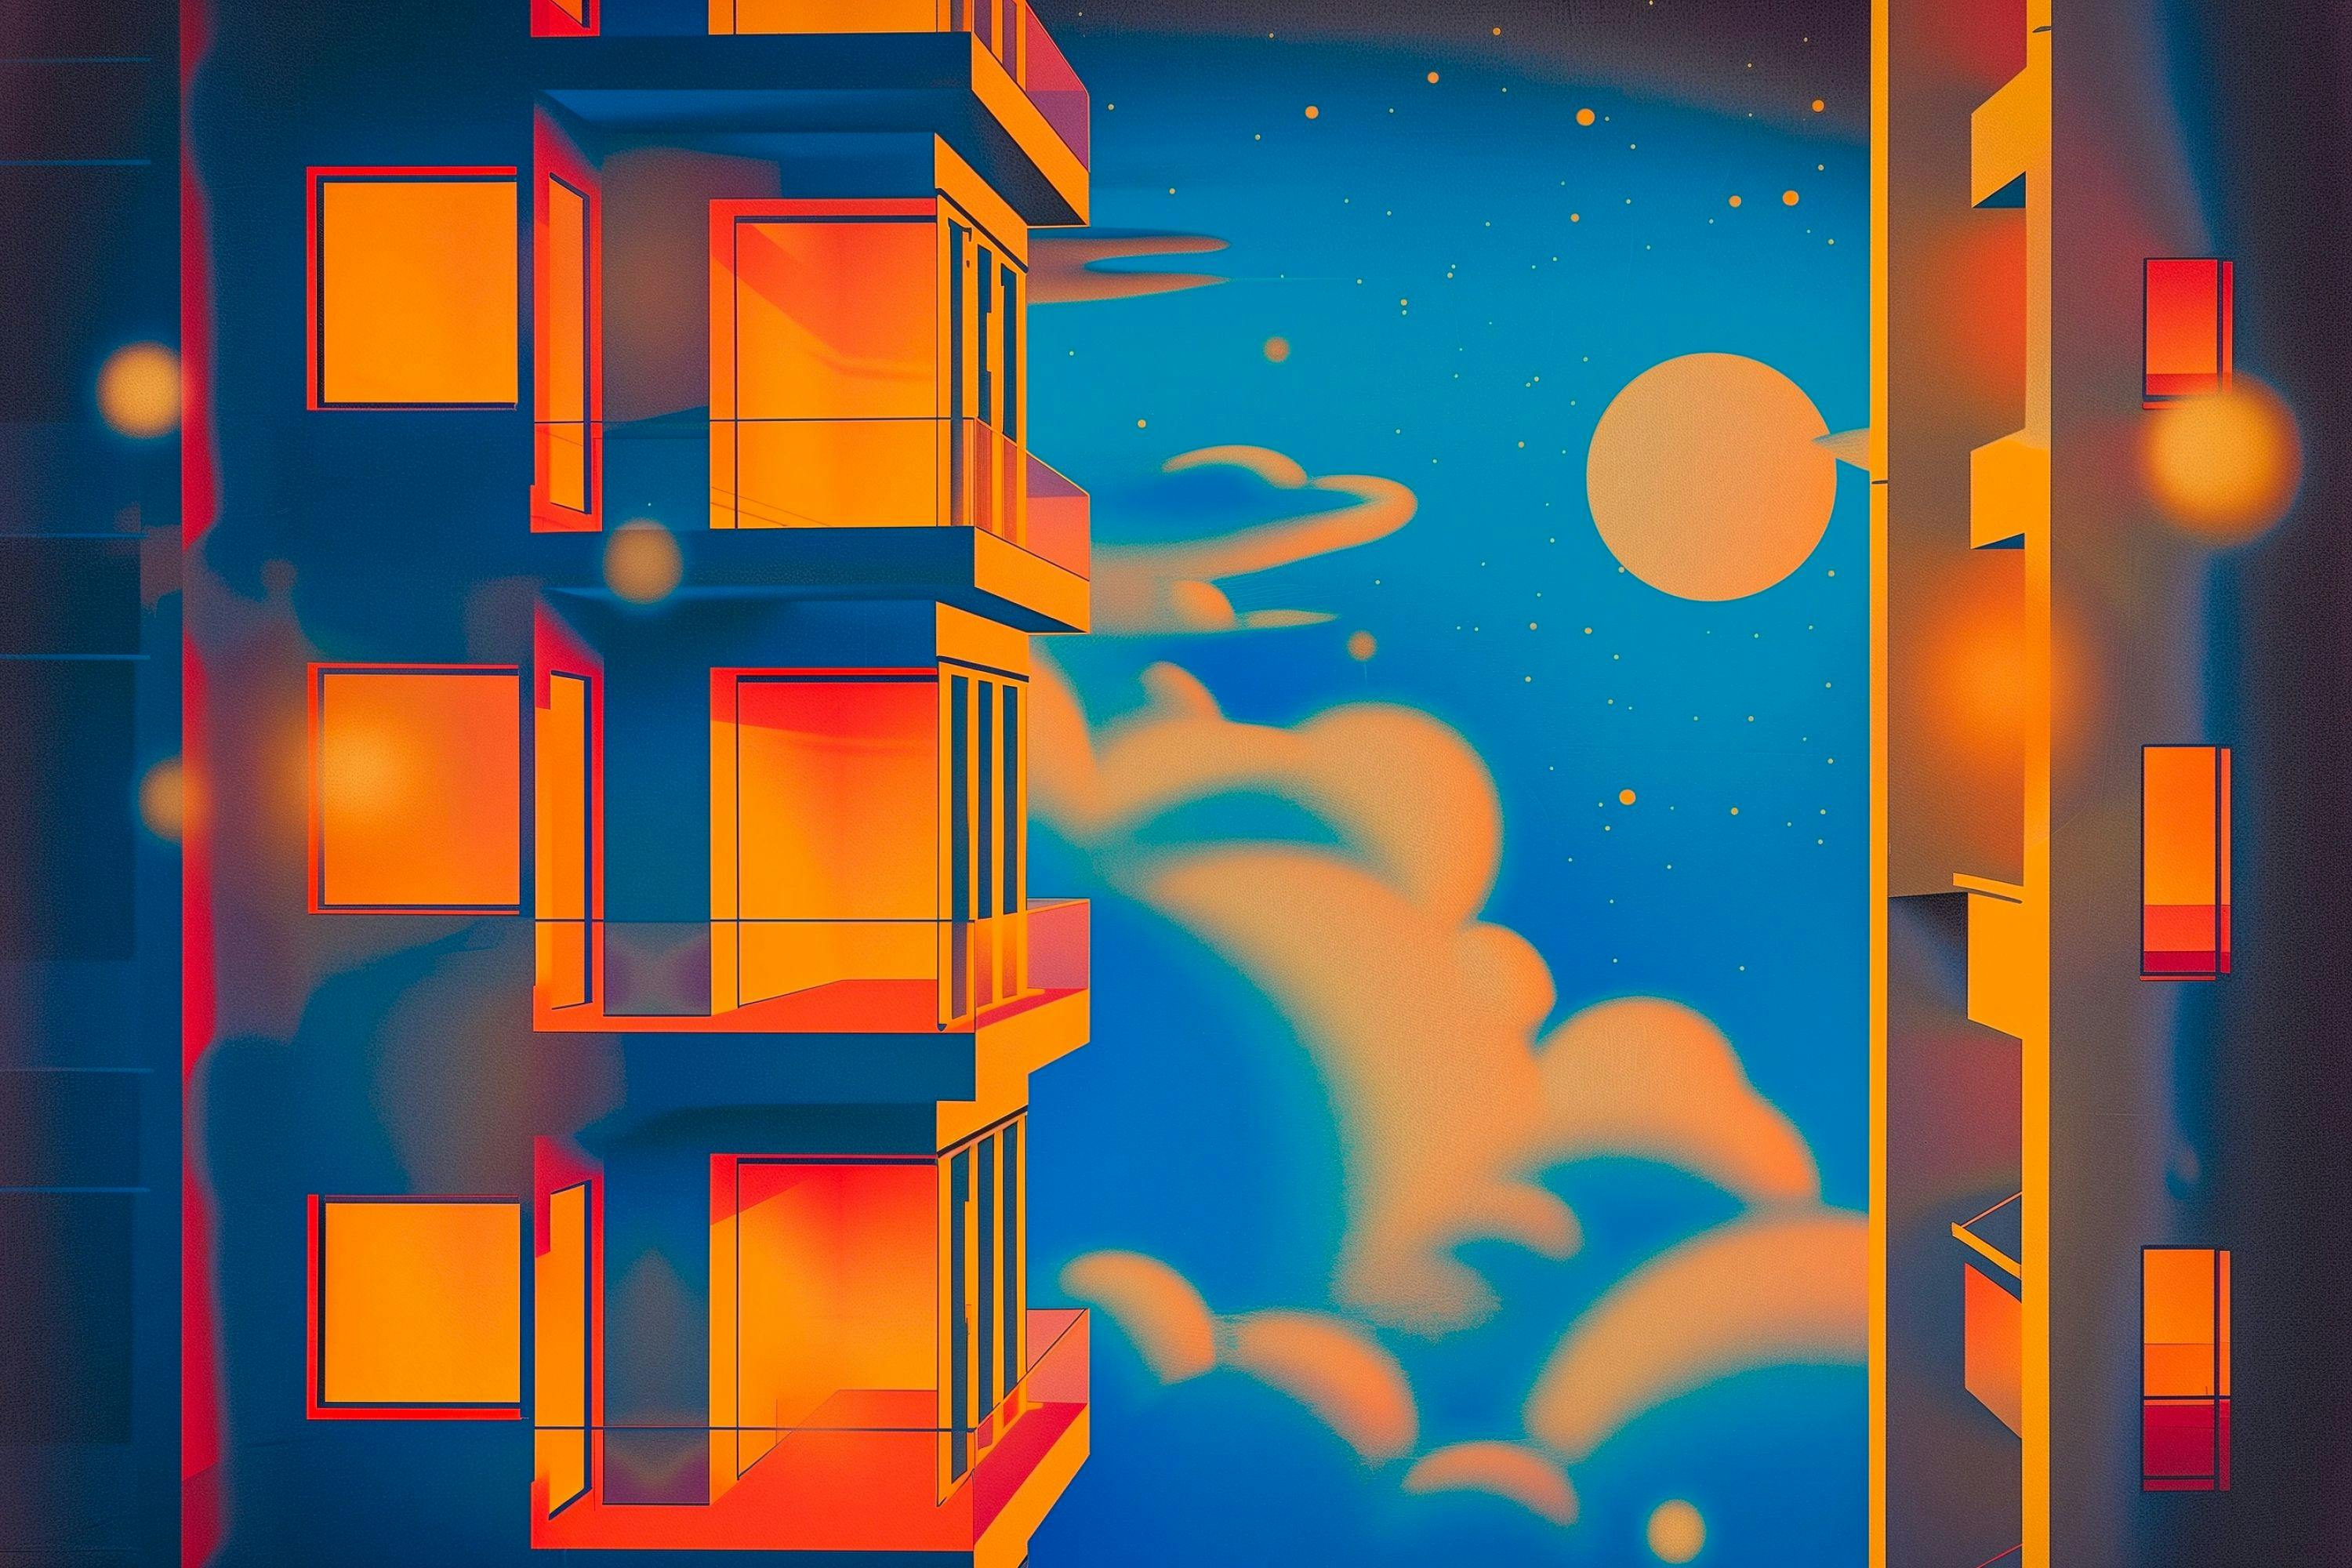 Artistic drawing of multi-story building with moon and cloud background